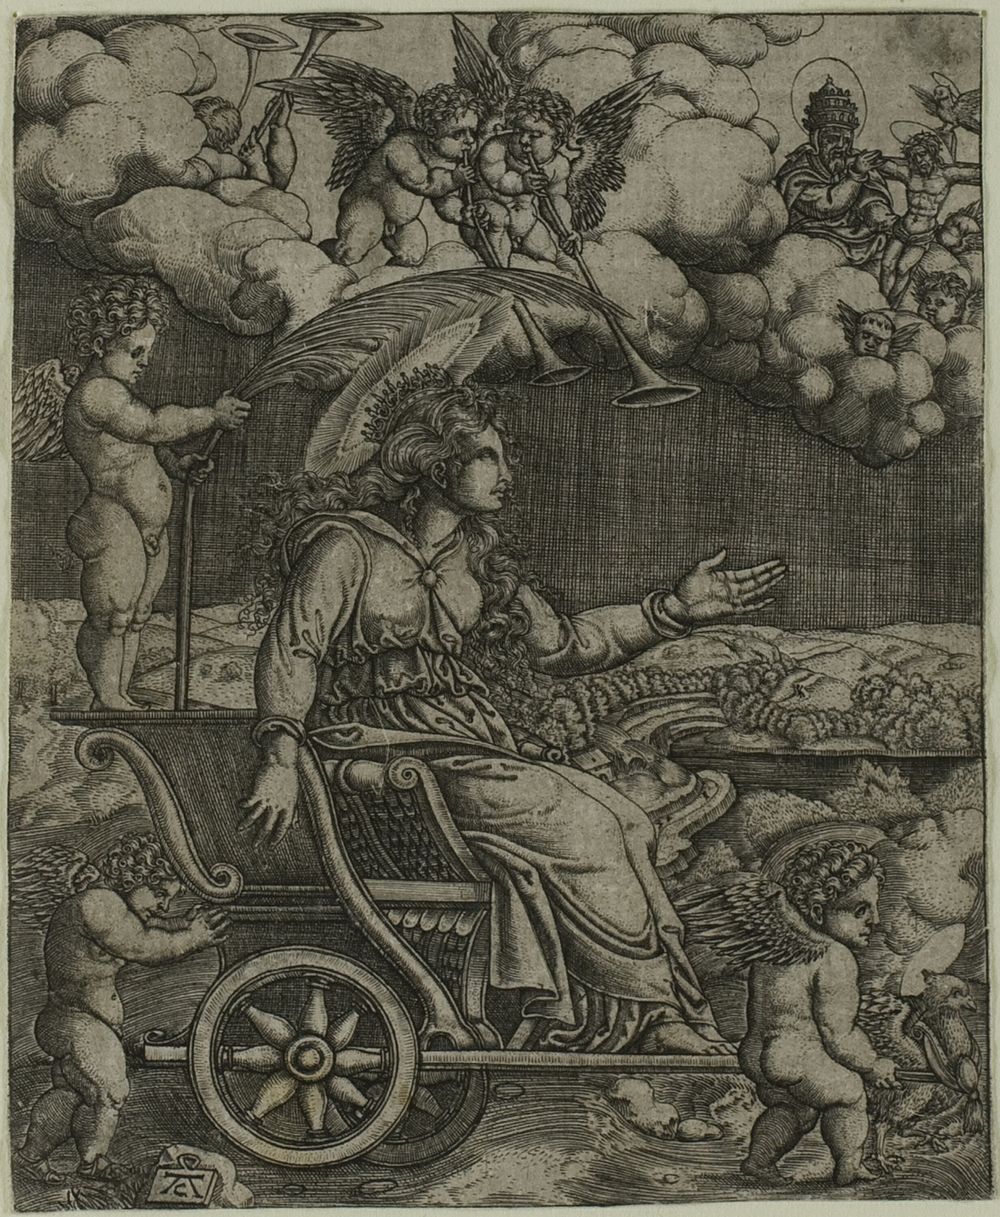 Allegory with a Woman in Roman Dress on a Triumphal Chariot by Master Allaert Claesz